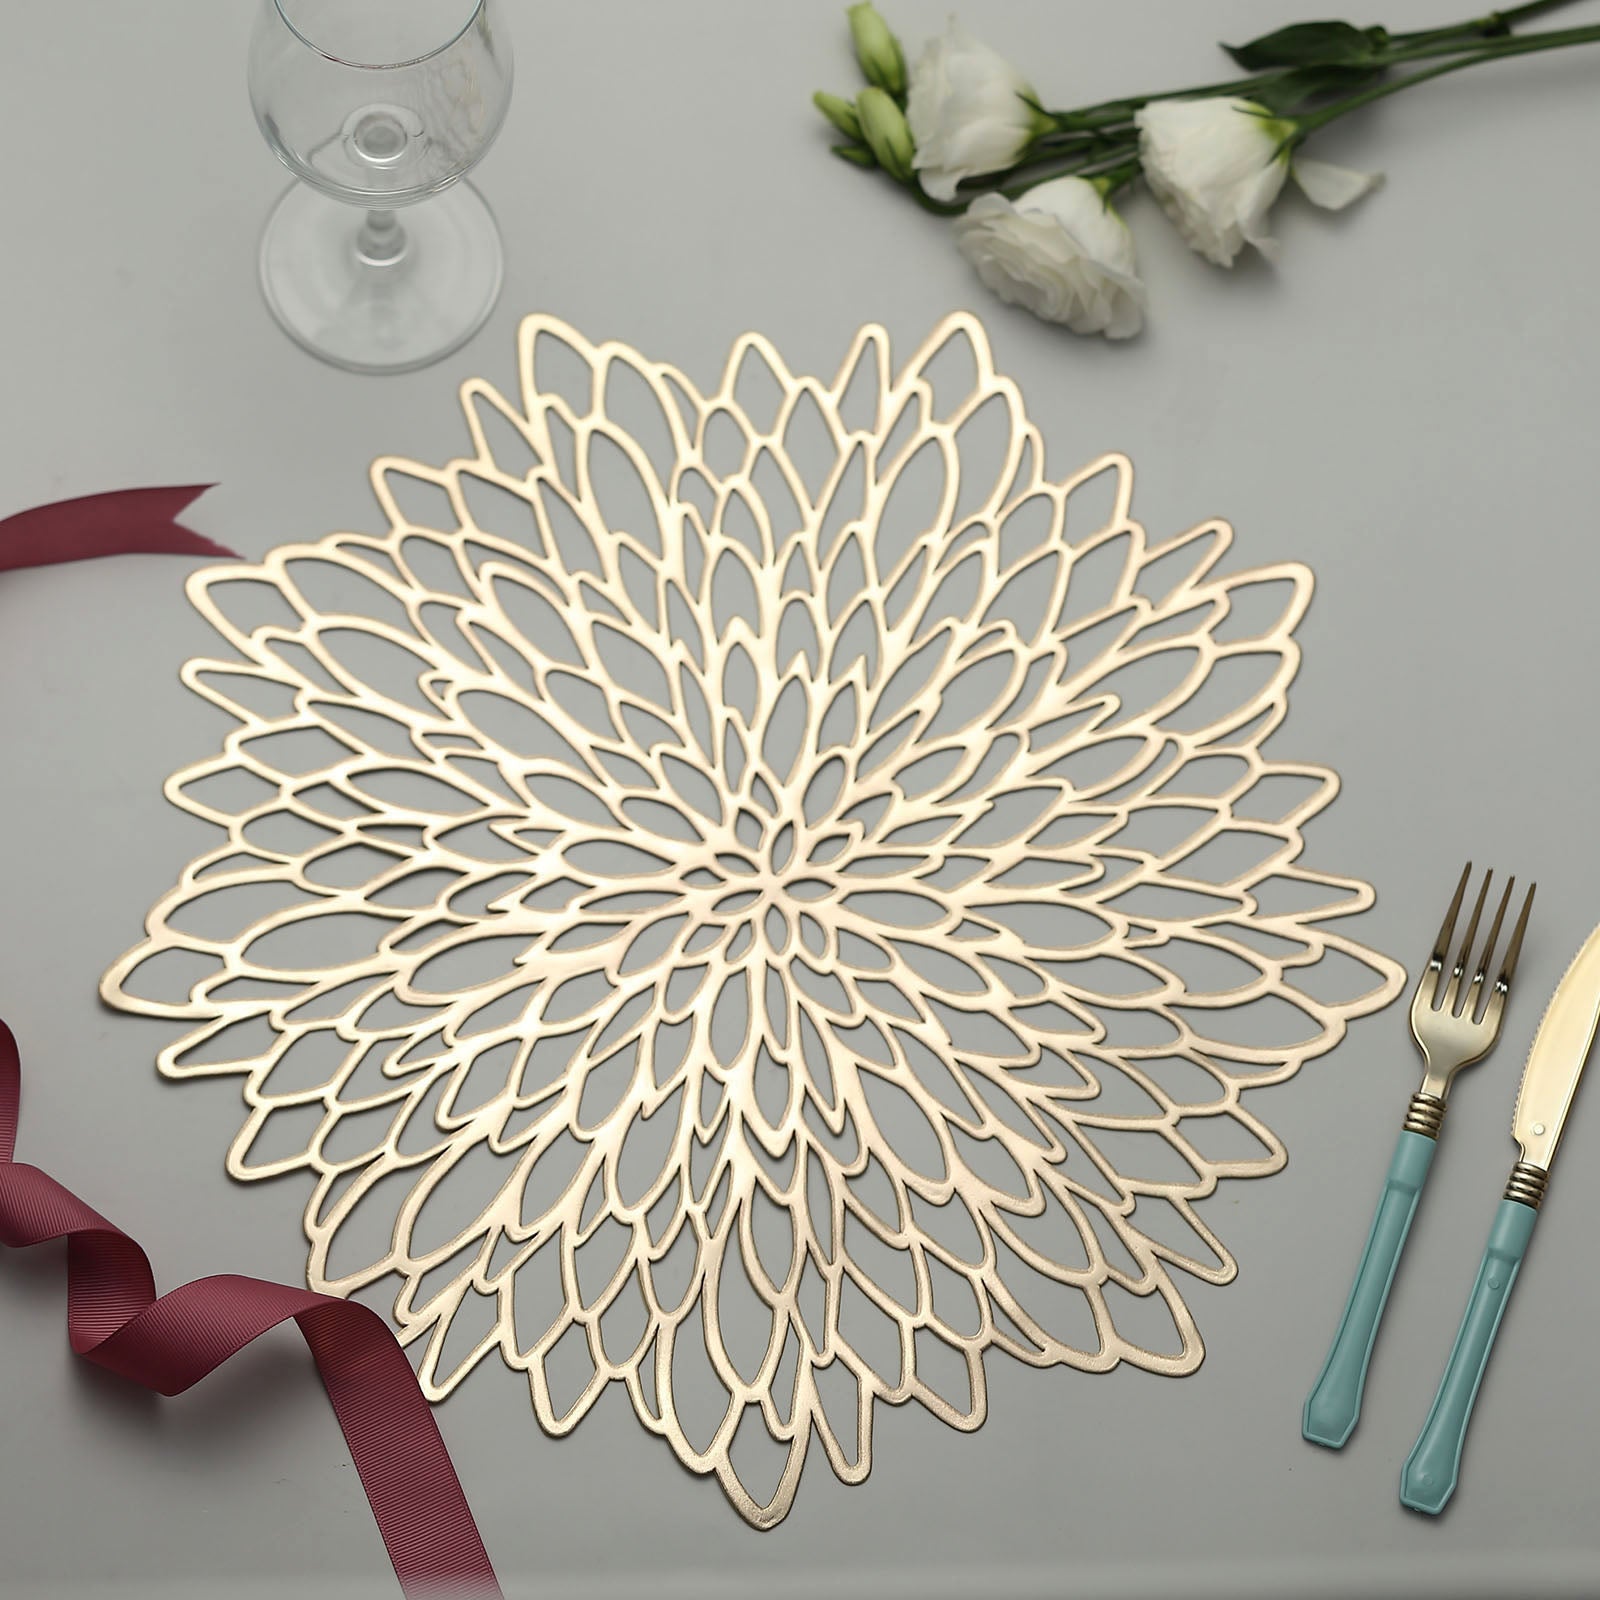 6 Pack | 15 Gold Decorative Floral Vinyl Placemats, Non-Slip Round Dining Table Mats | by Tableclothsfactory